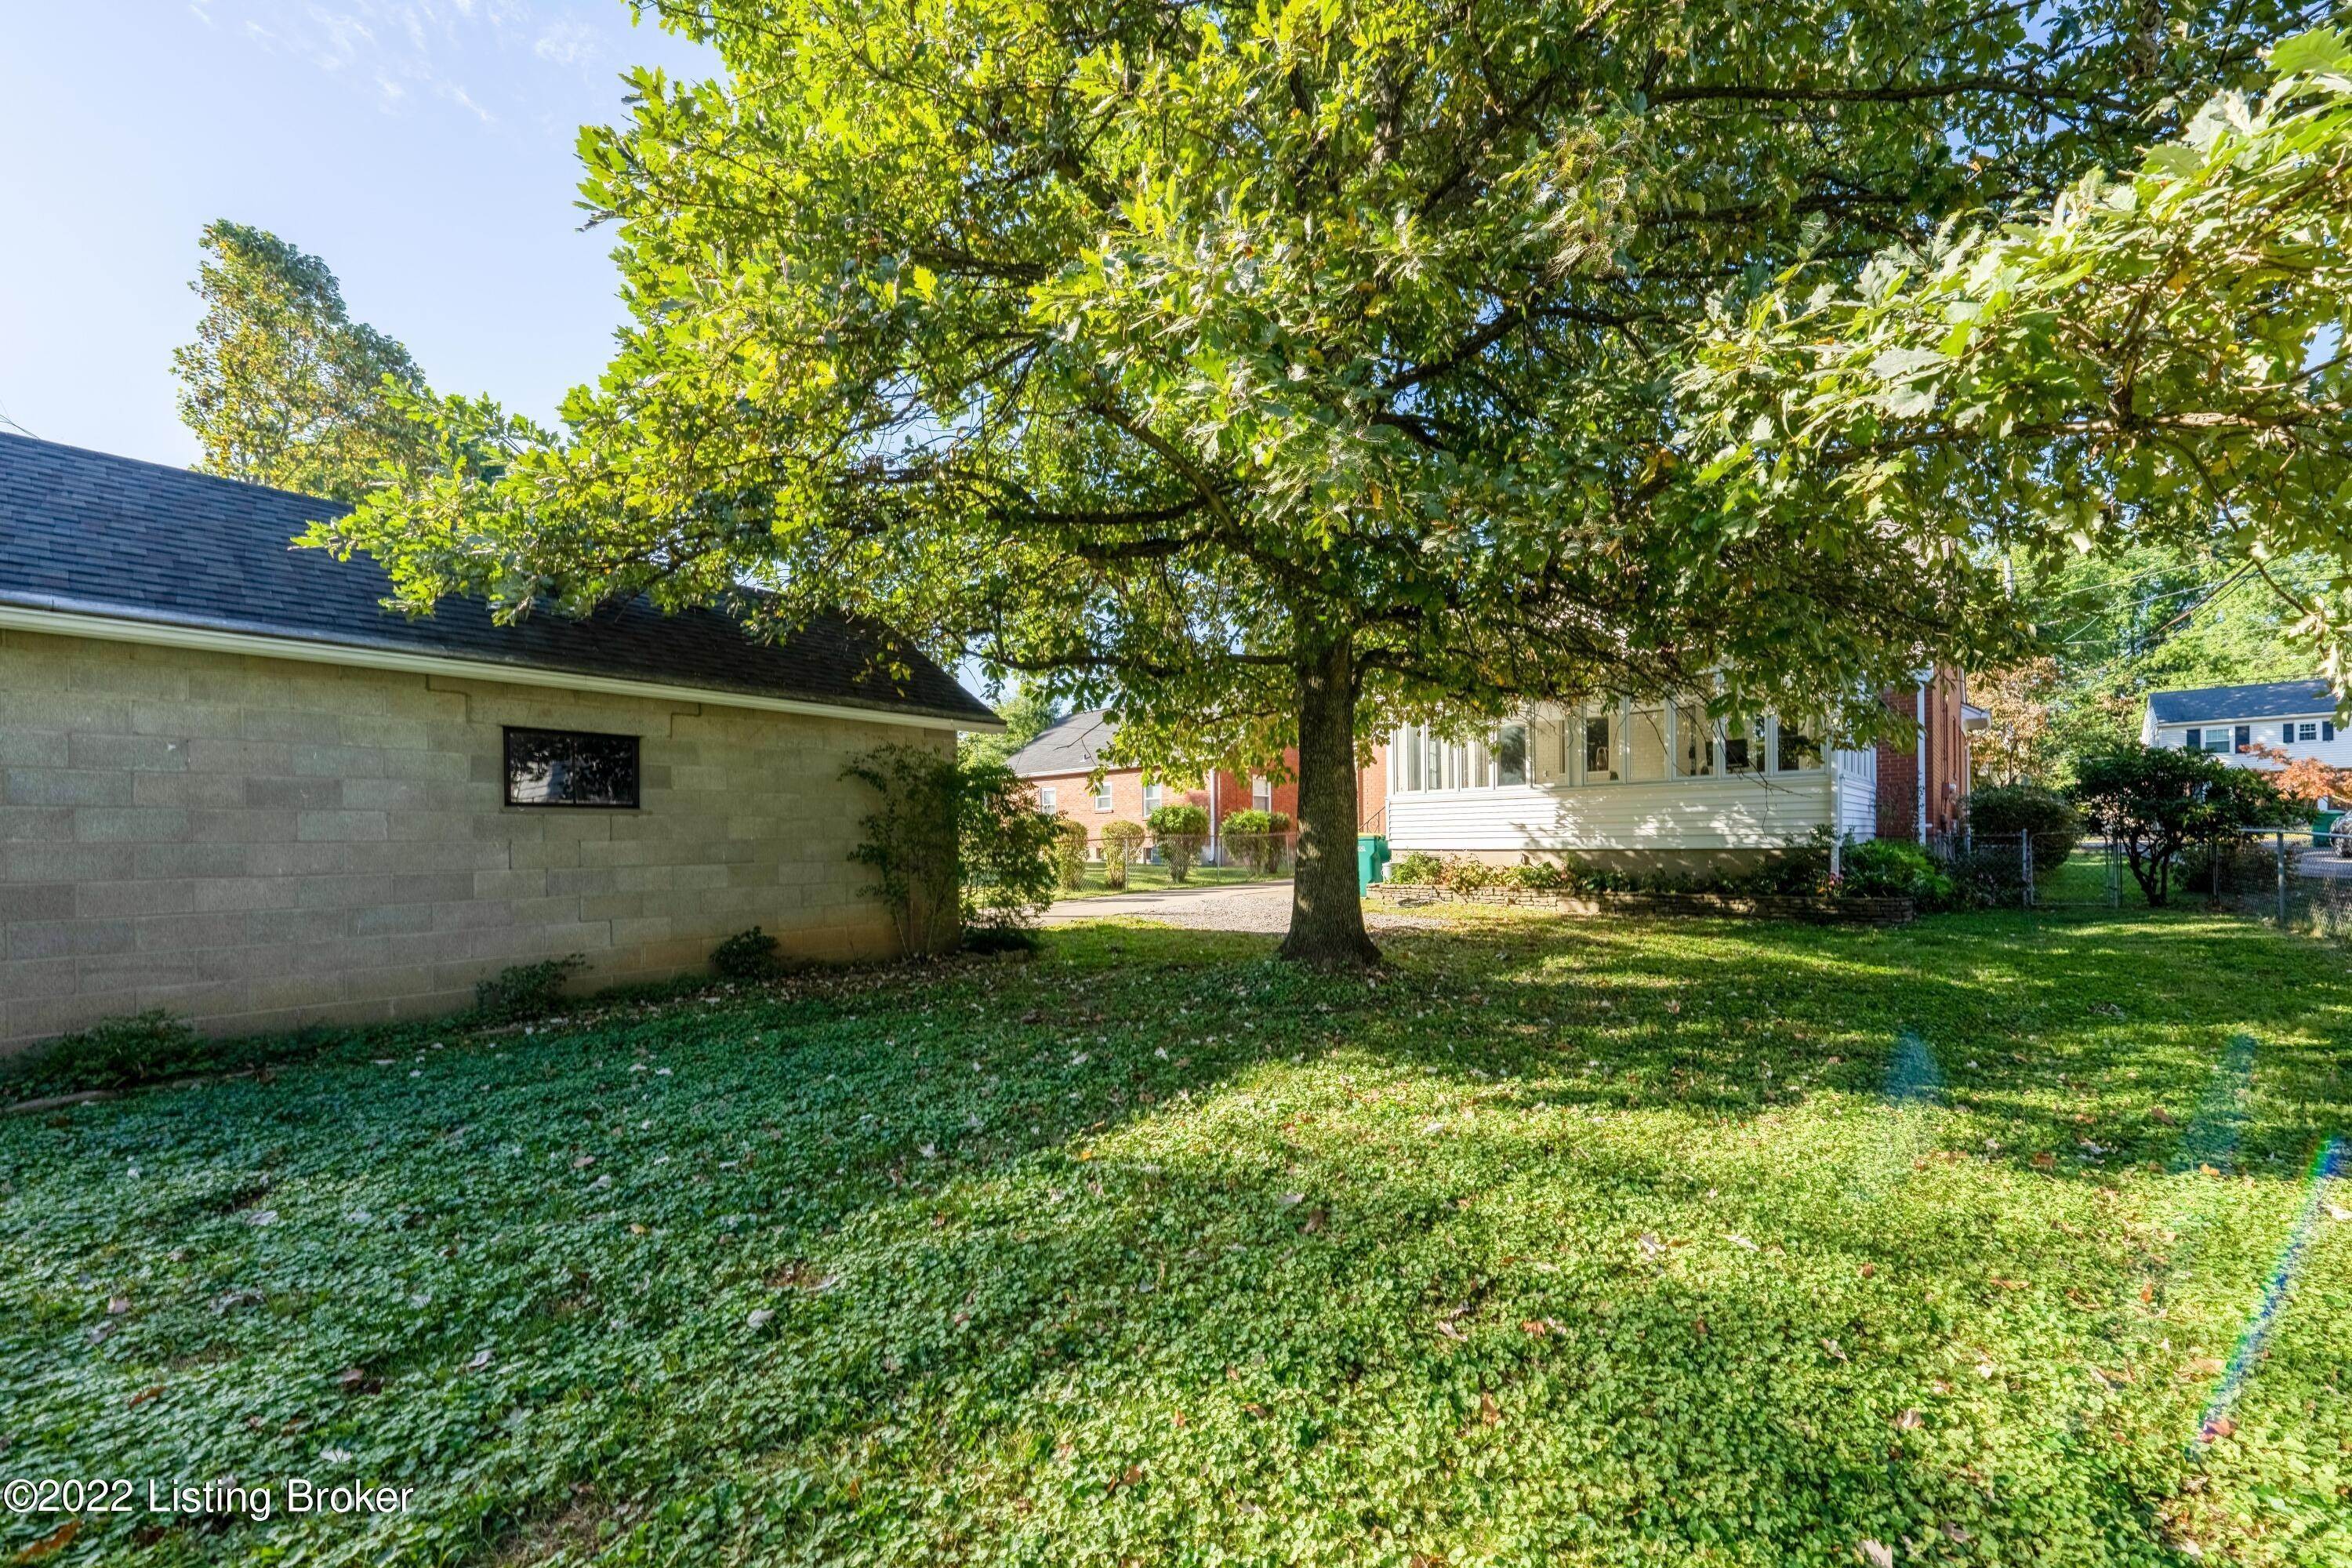 42. Single Family at Louisville, KY 40207